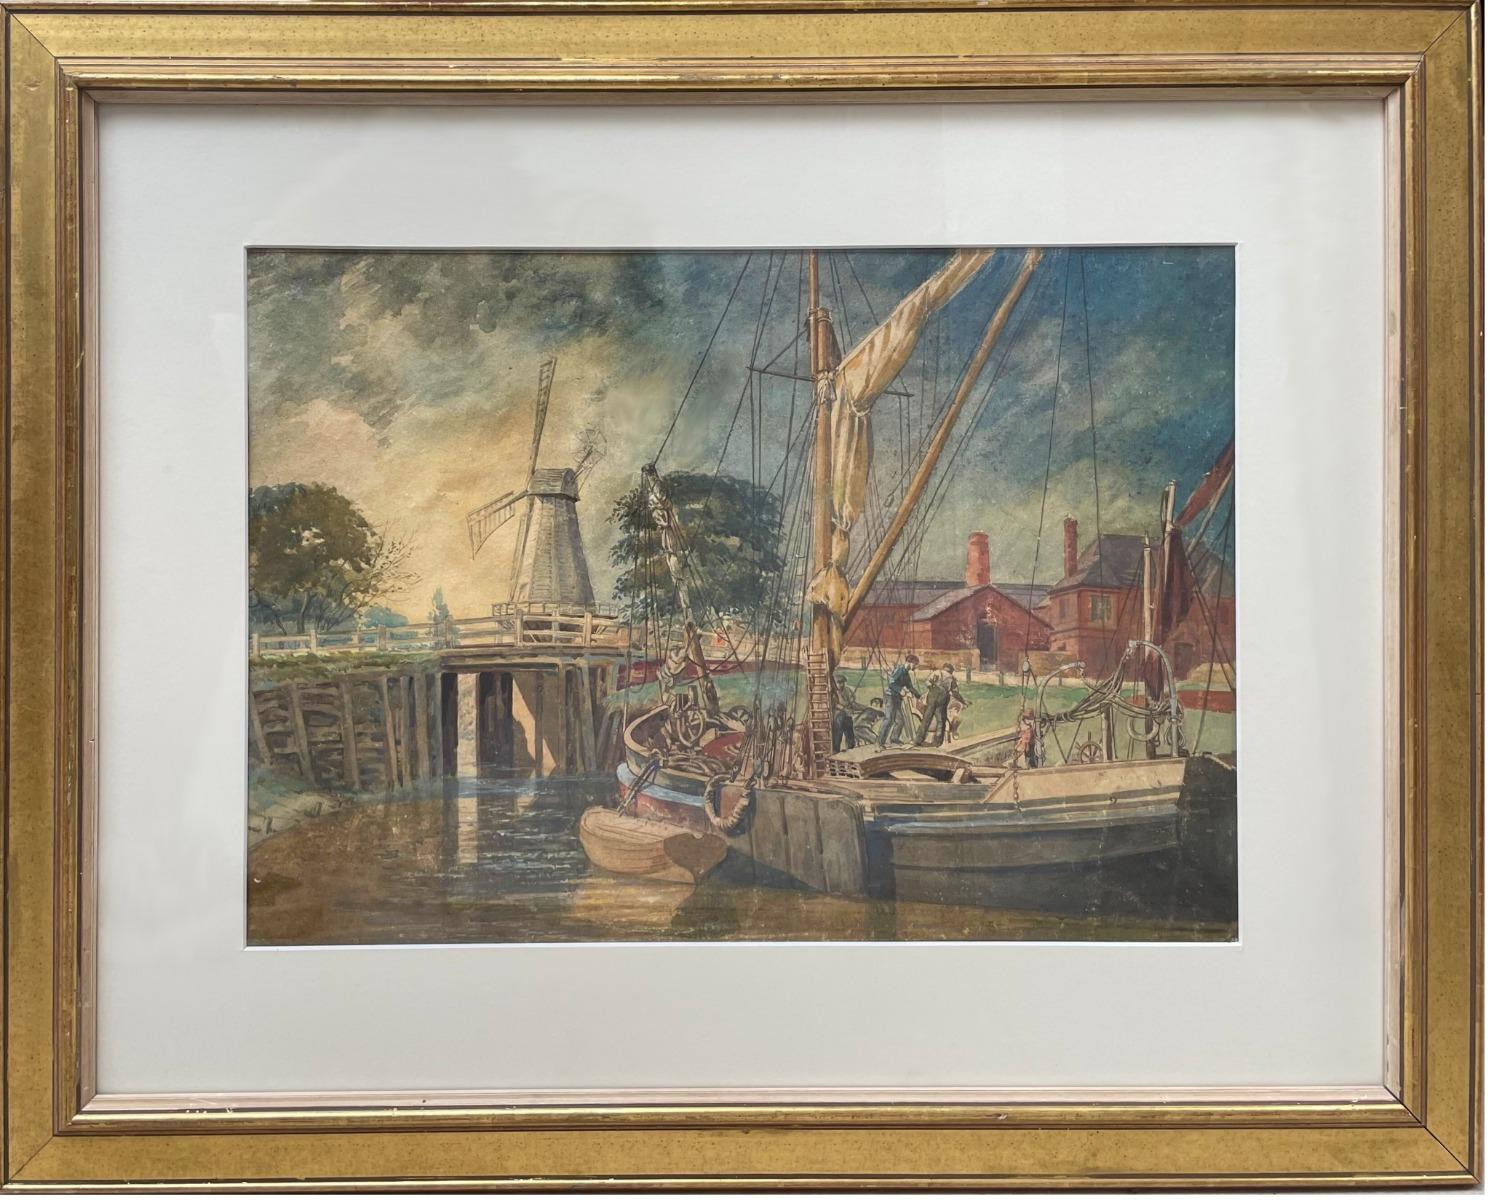 Unknown Landscape Art - Roy Morris (1890-1967) - Framed Watercolour, Gillingham Mill and Thames Barge